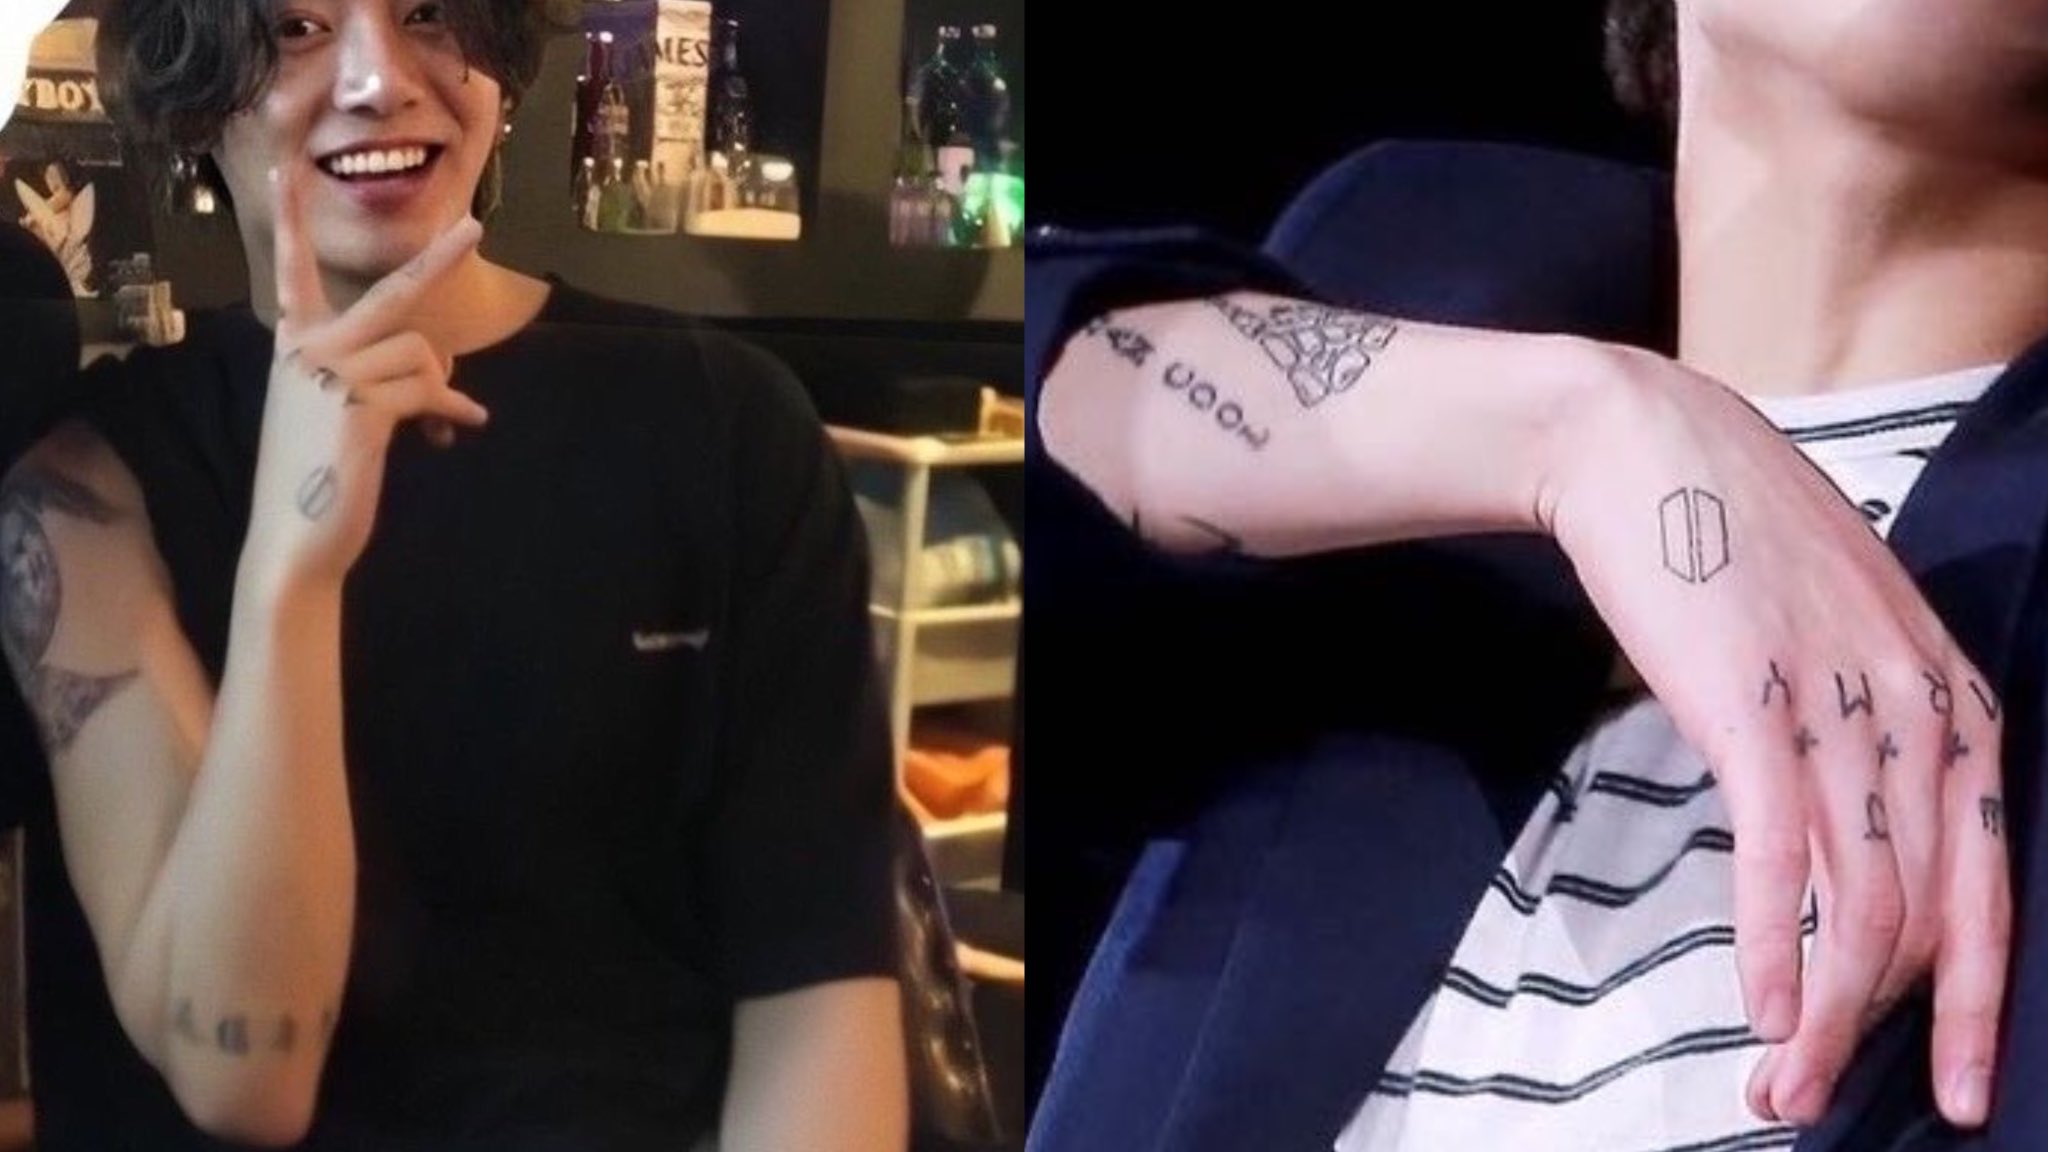 This is Jungkook's tattoo 🔥 